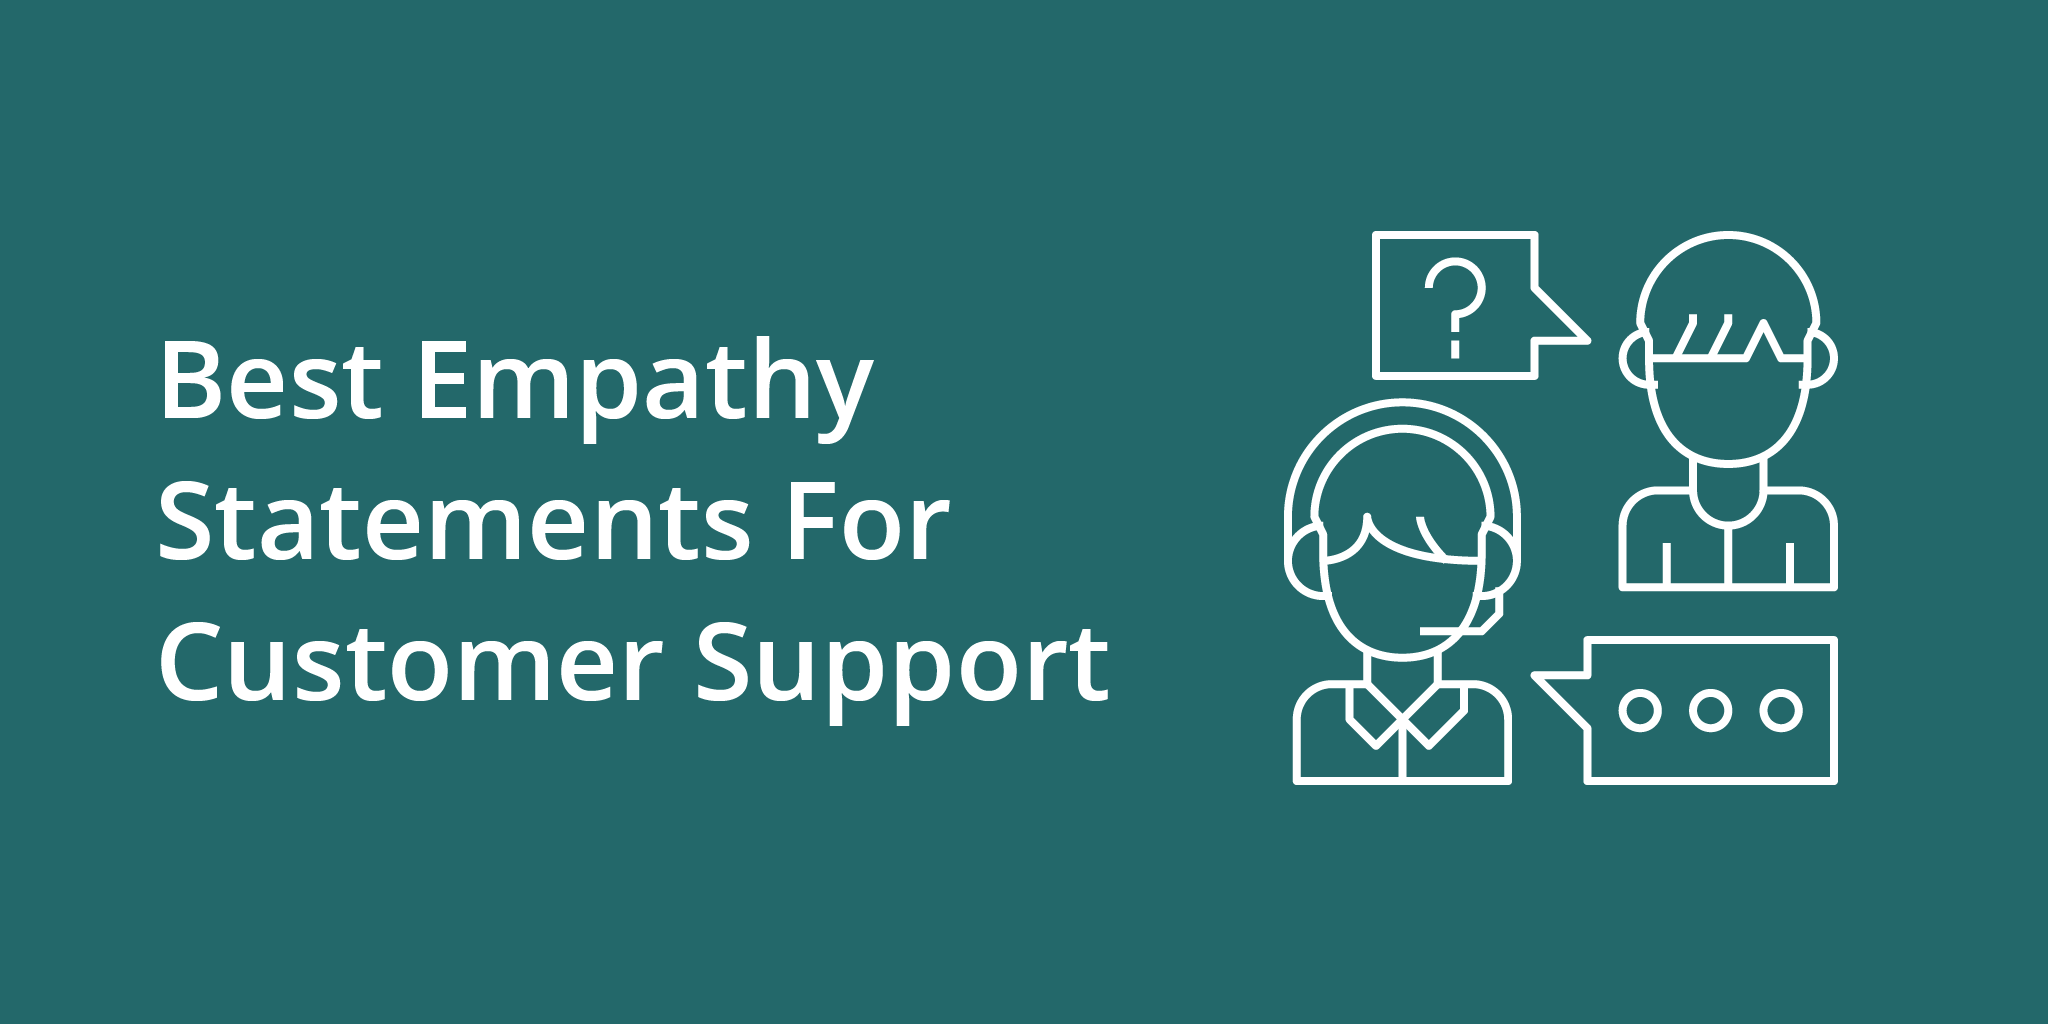 Best Empathy Statements For Customer Support | Telephones for business